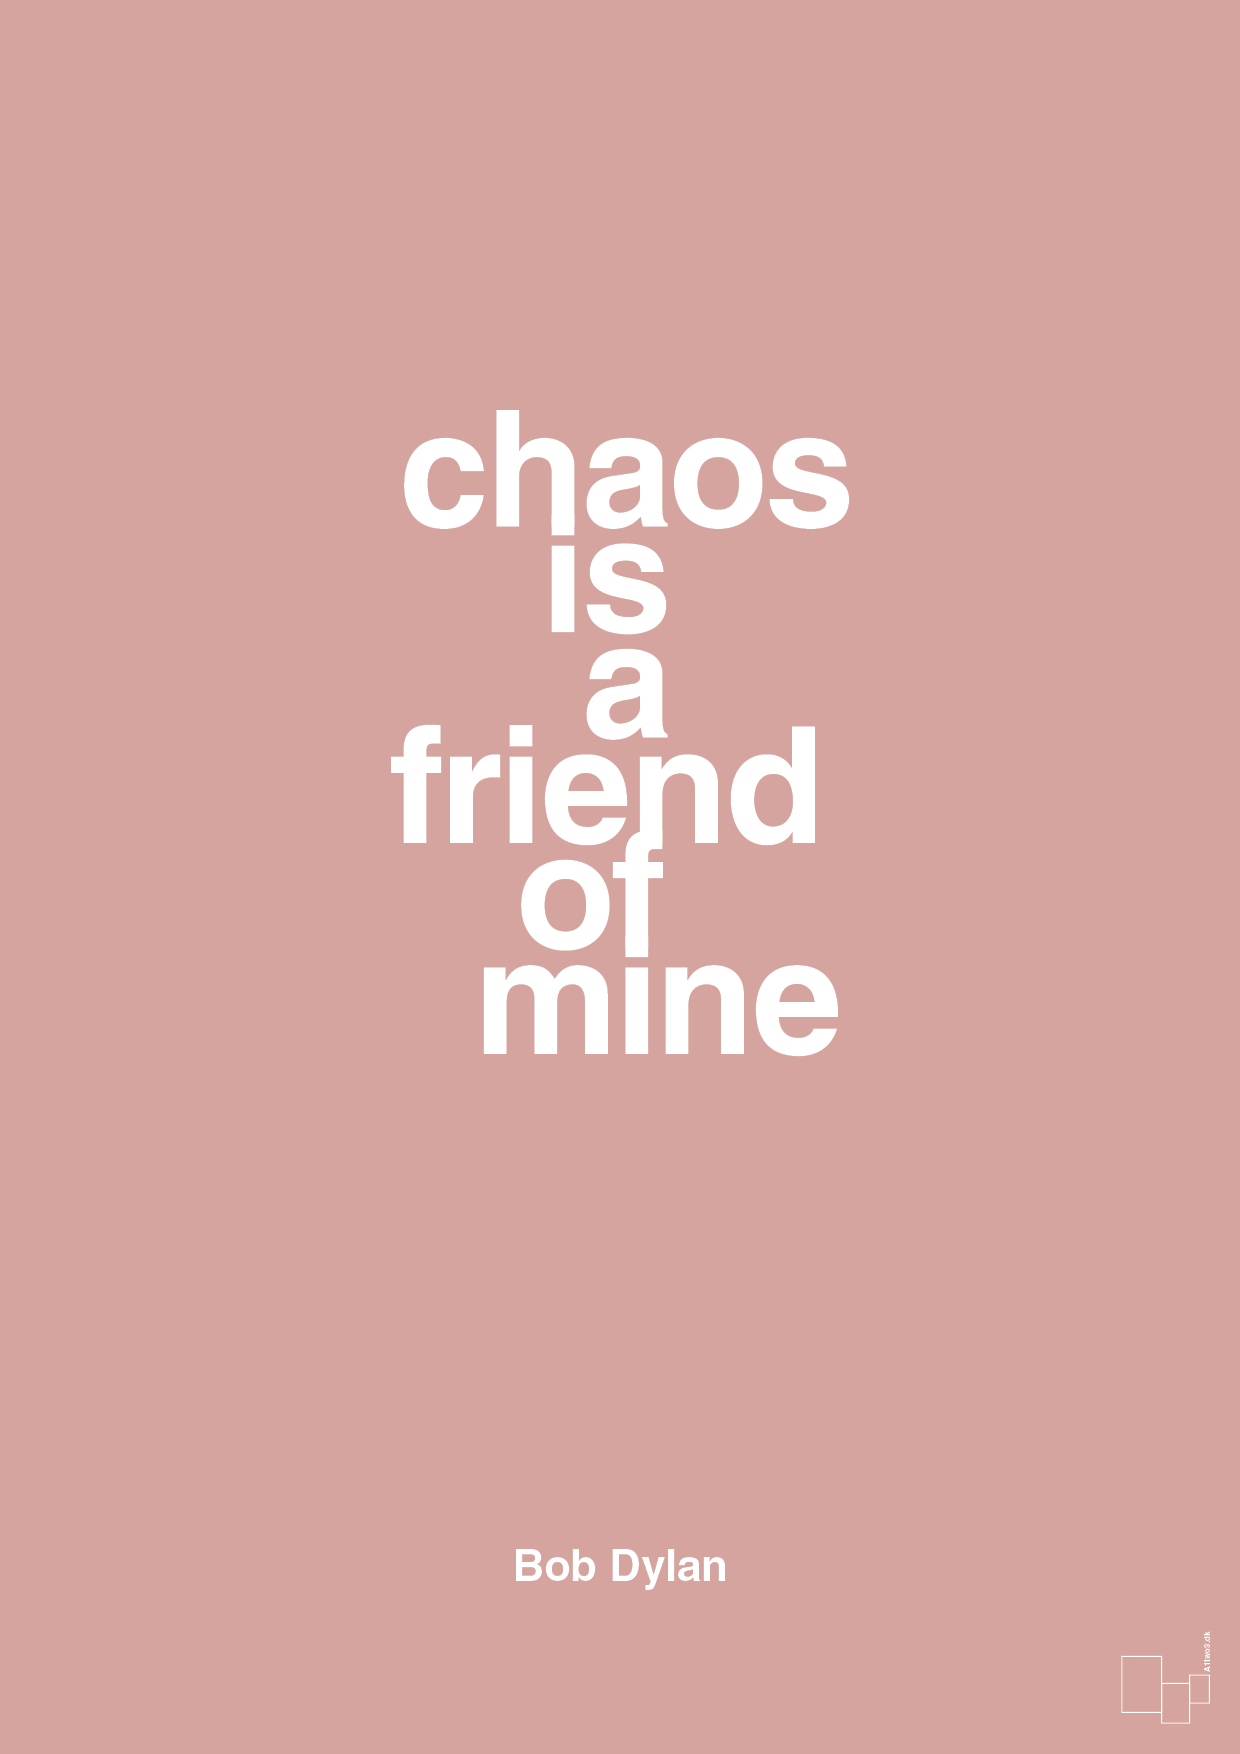 chaos is a friend of mine - Plakat med Citater i Bubble Shell